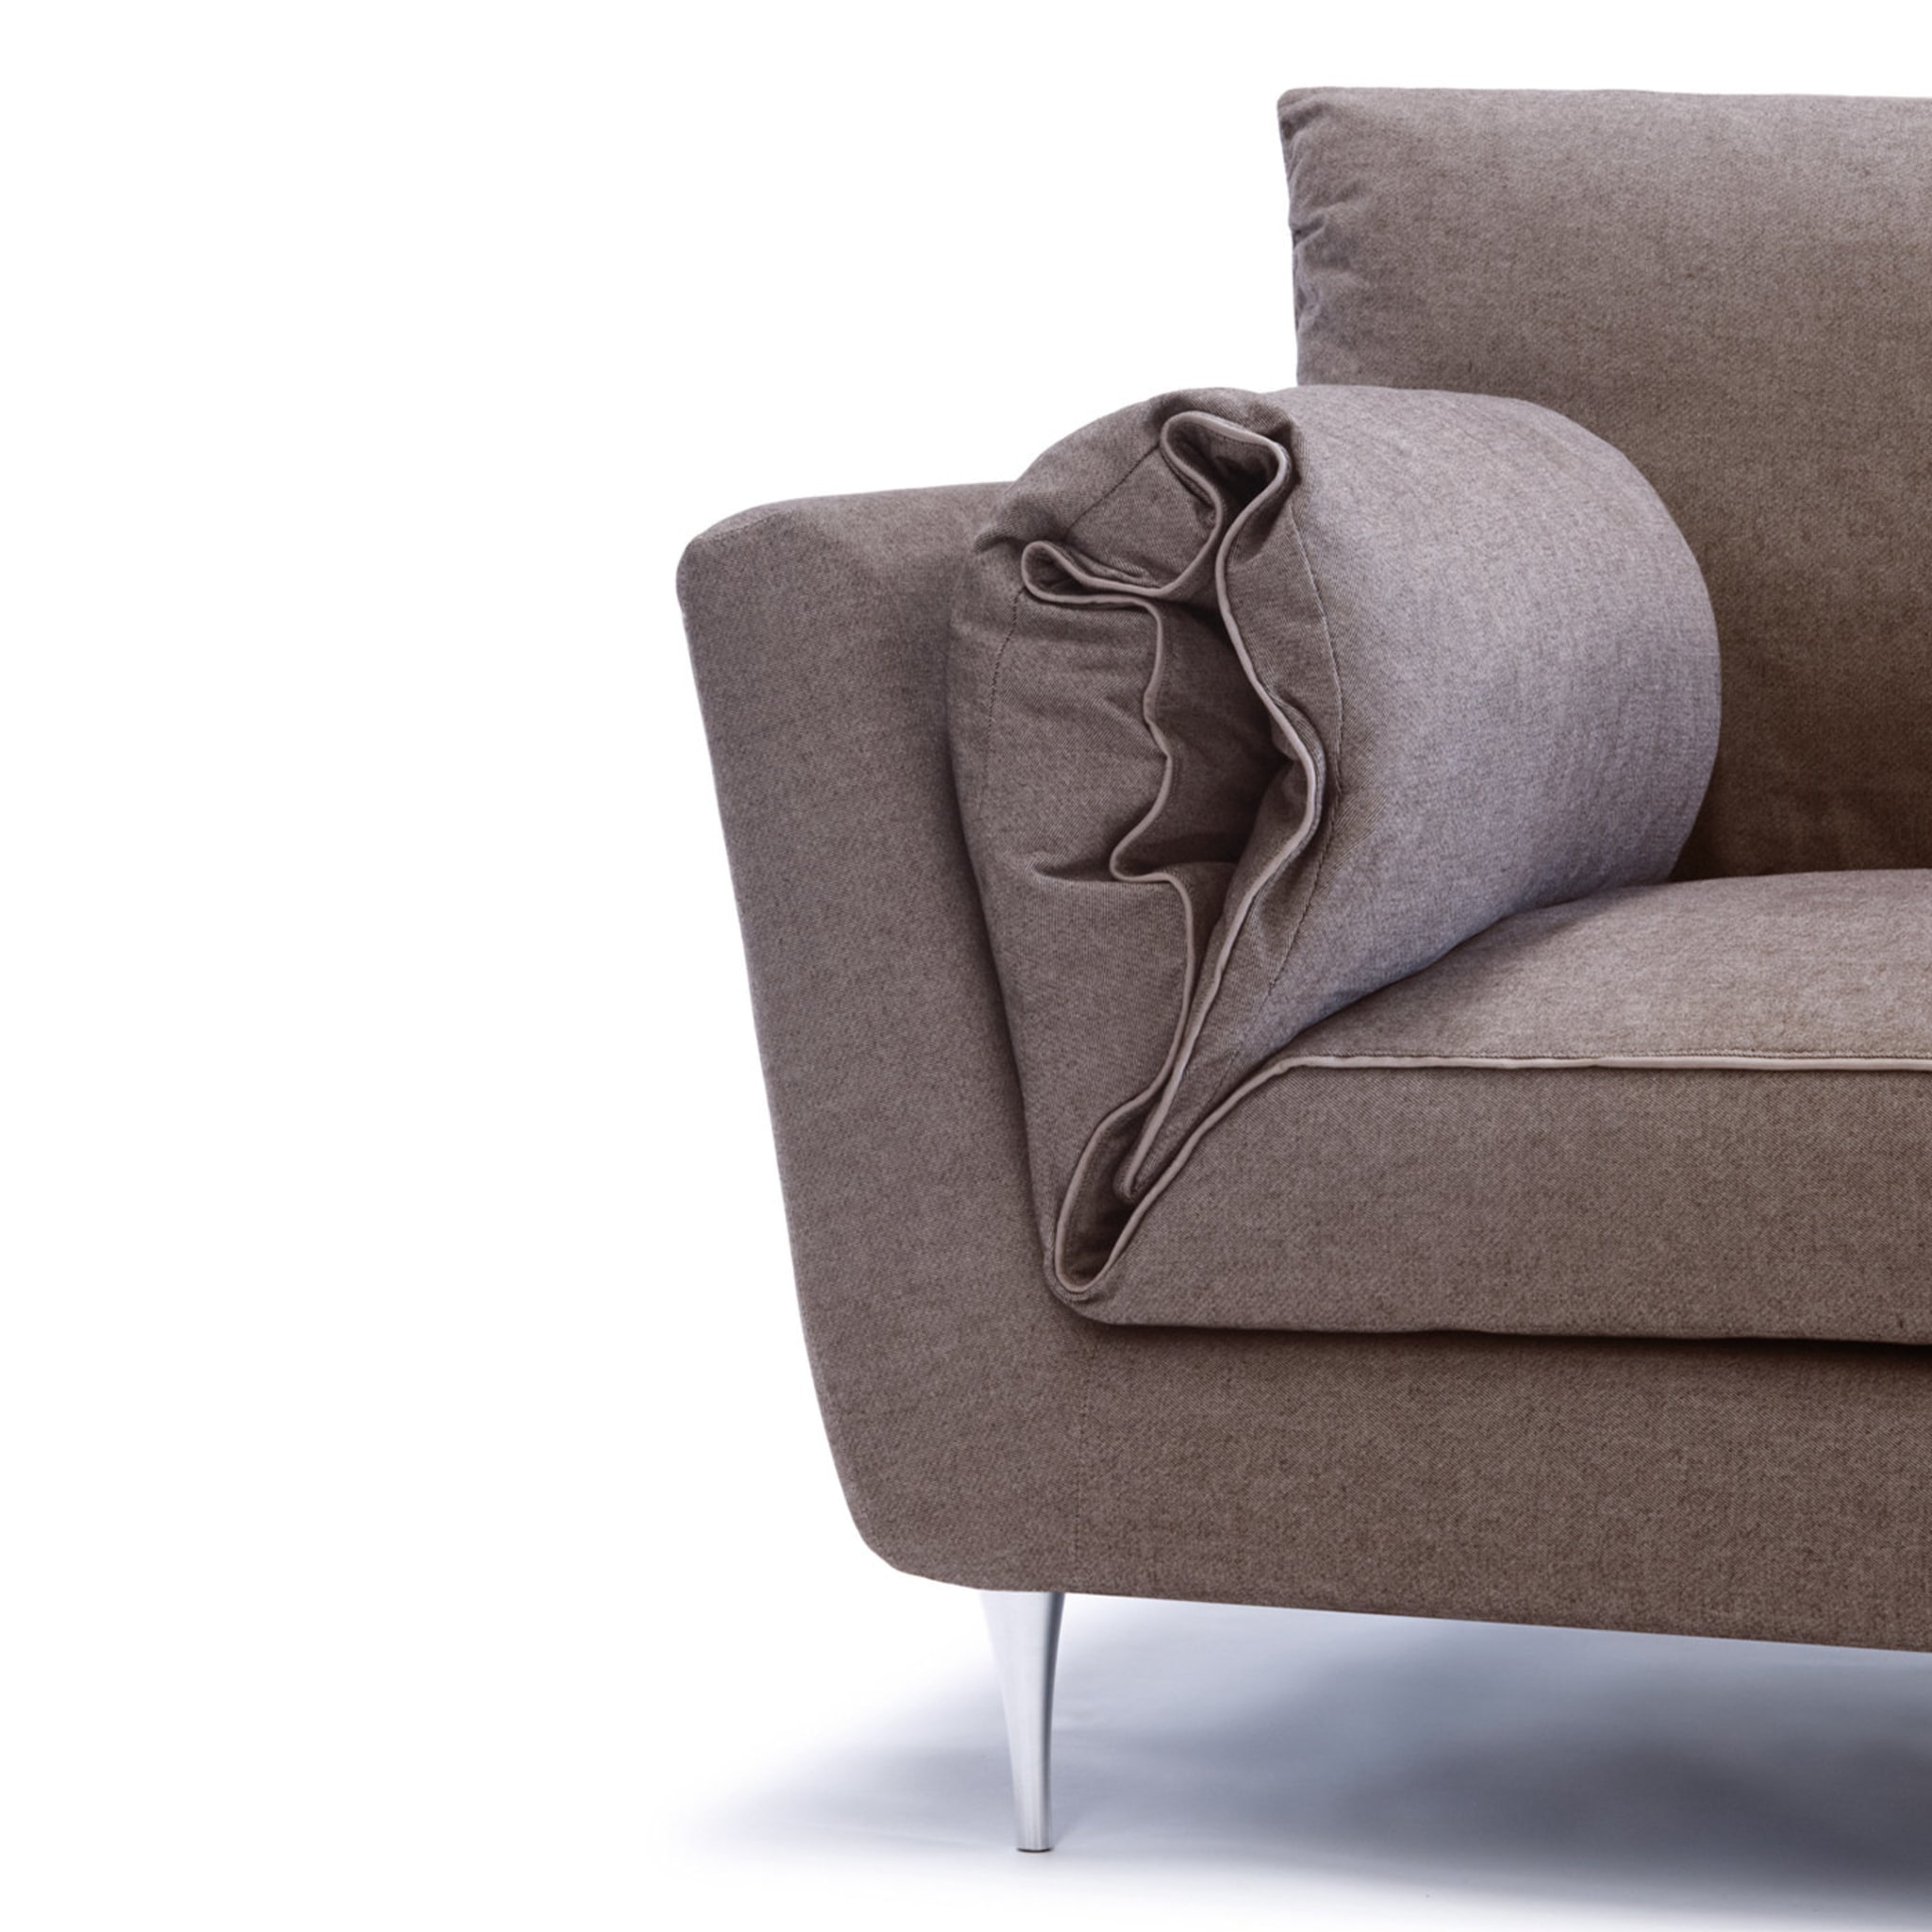 Casquet Ecological Sofa by ddpstudio - Alternative view 2